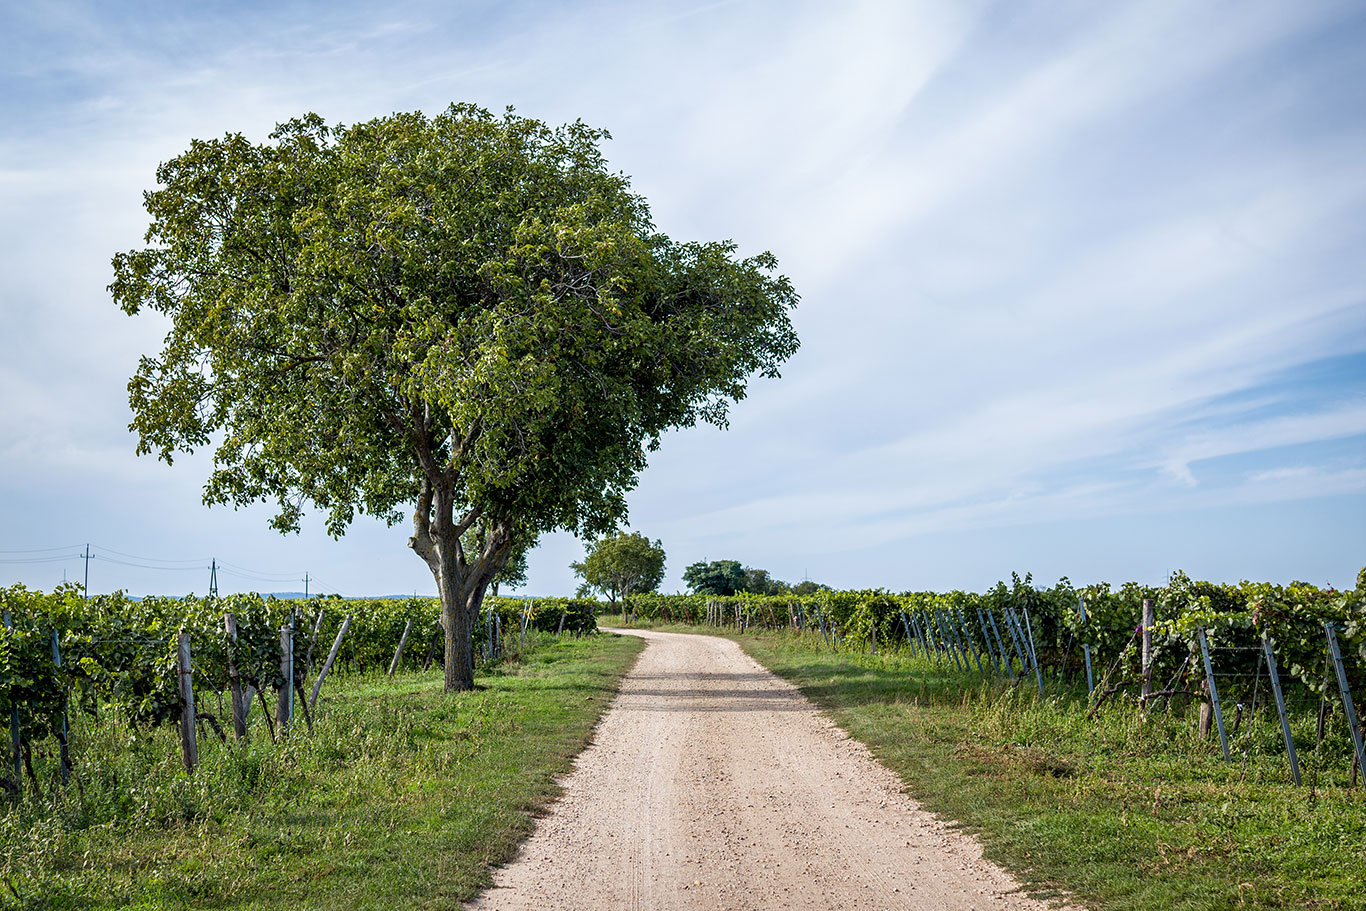 A cycle path in Central Burgenland that leads through a vineyard